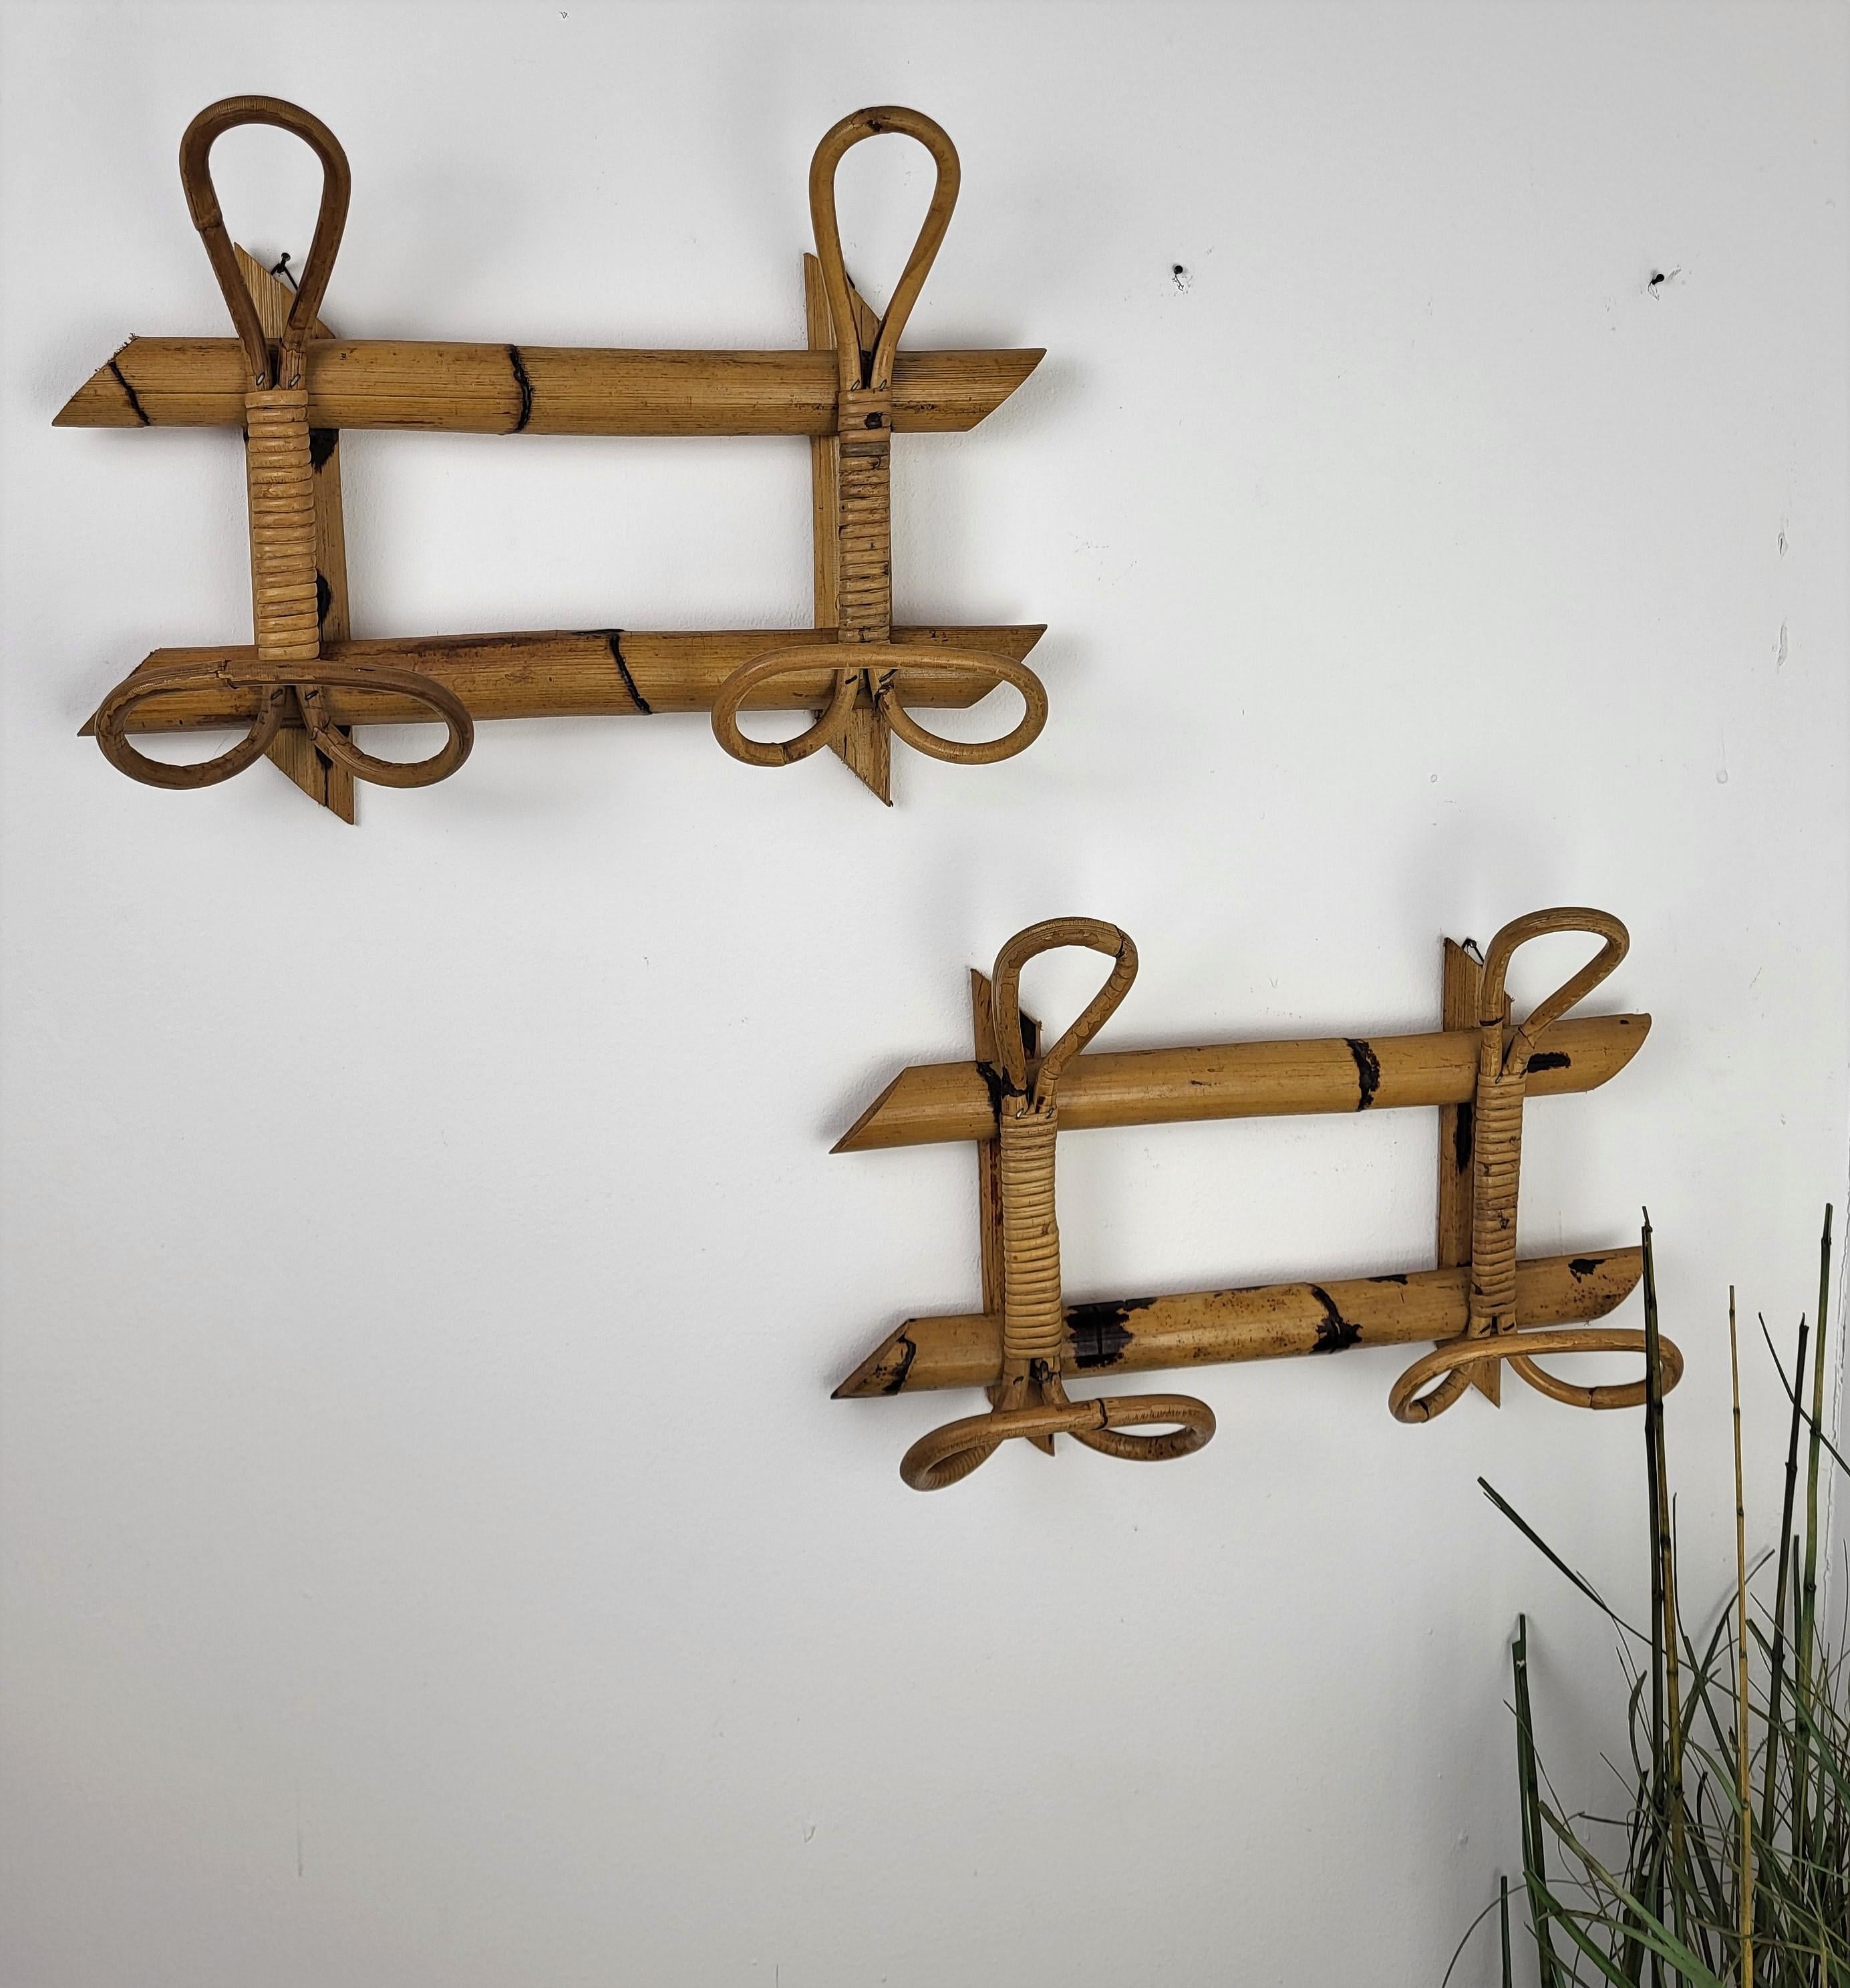 Beautiful 1960s Italian Mid-Century Modern coat hanger rack perfect in any entrance hallway or room for coats and bags as well as in a bedroom or bathroom for bathrobes and towels. This charming piece is in the typical style of Audoux and Minet,